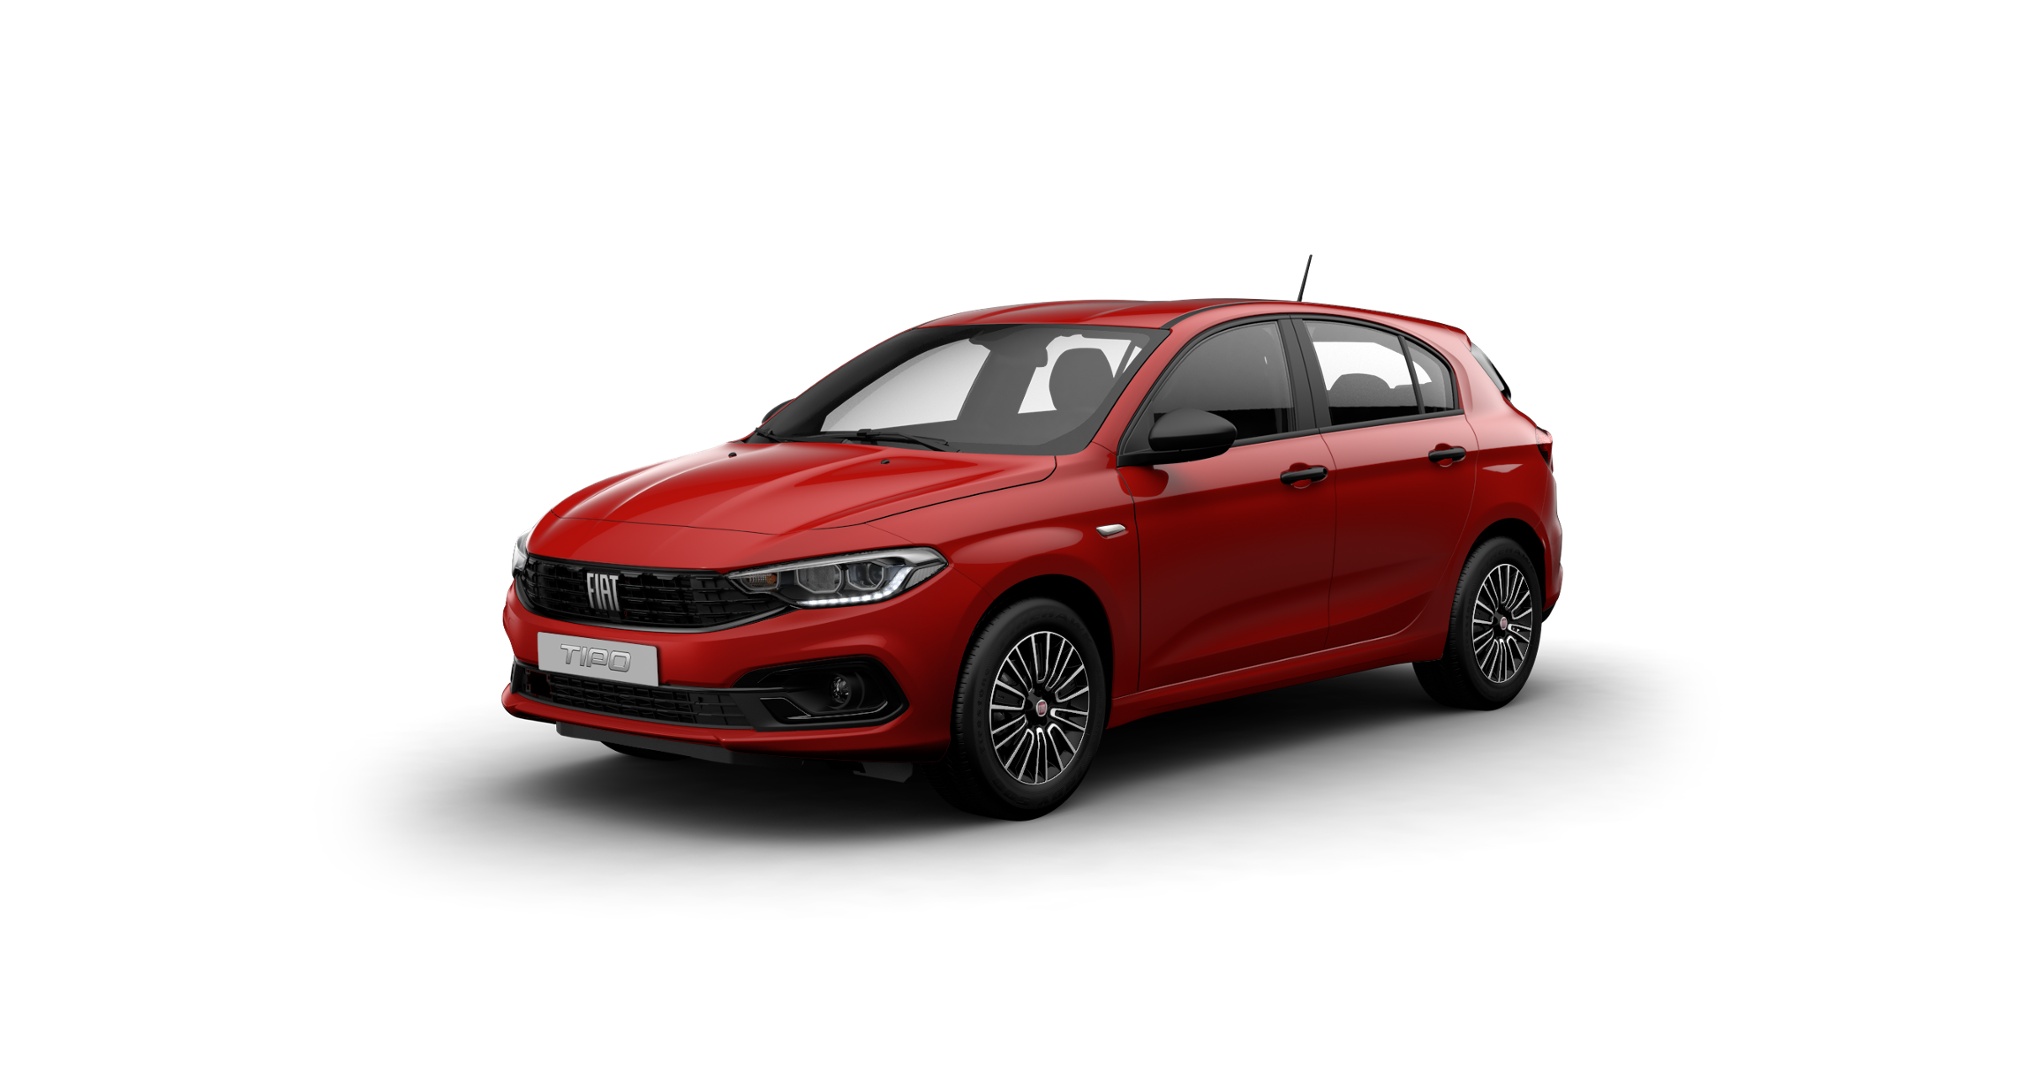 FIAT TIPO HATCHBACK CITY LIFE 1.0 100HP